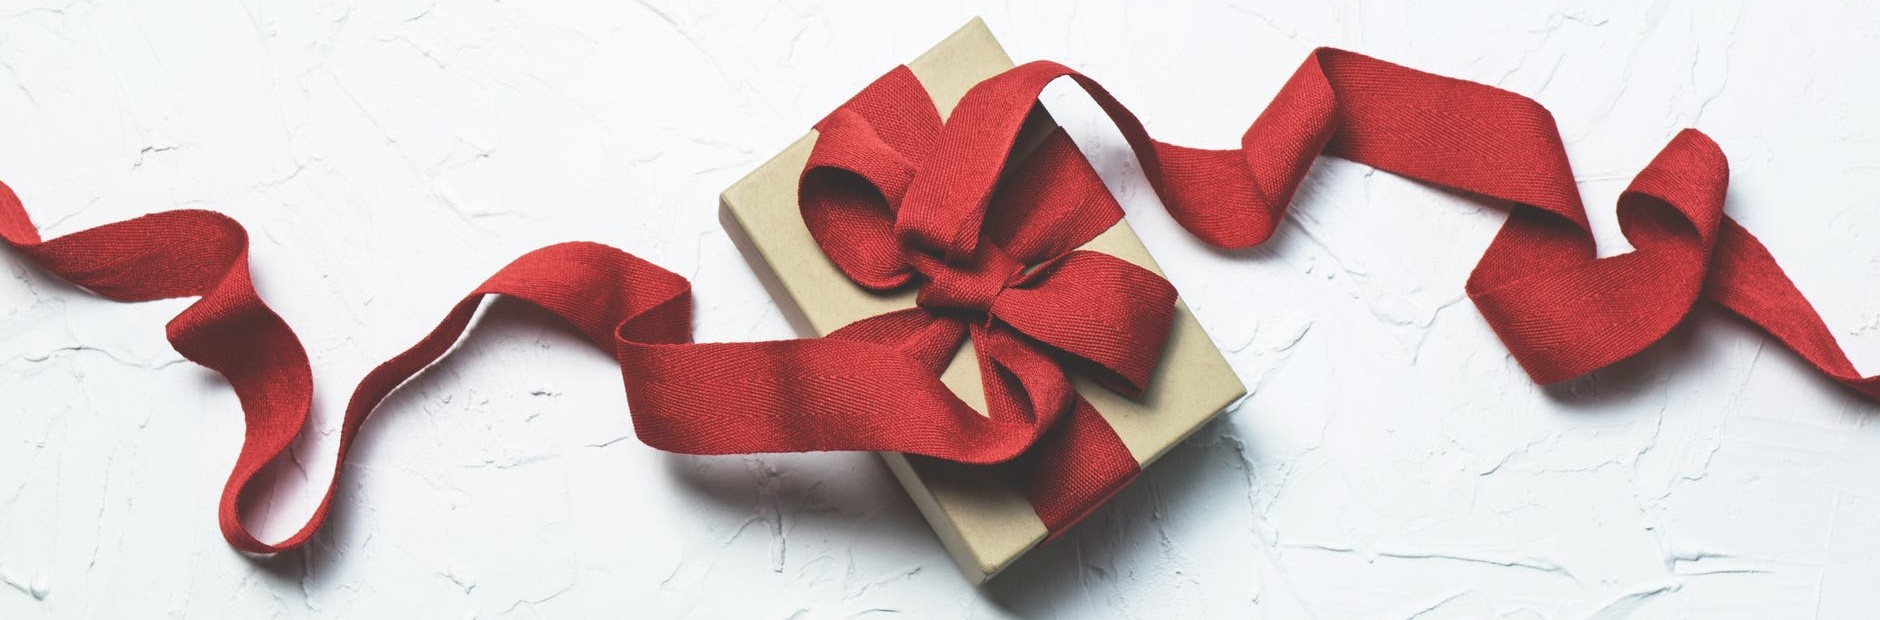 Red gift box with ribbon. Gifts for Christmas